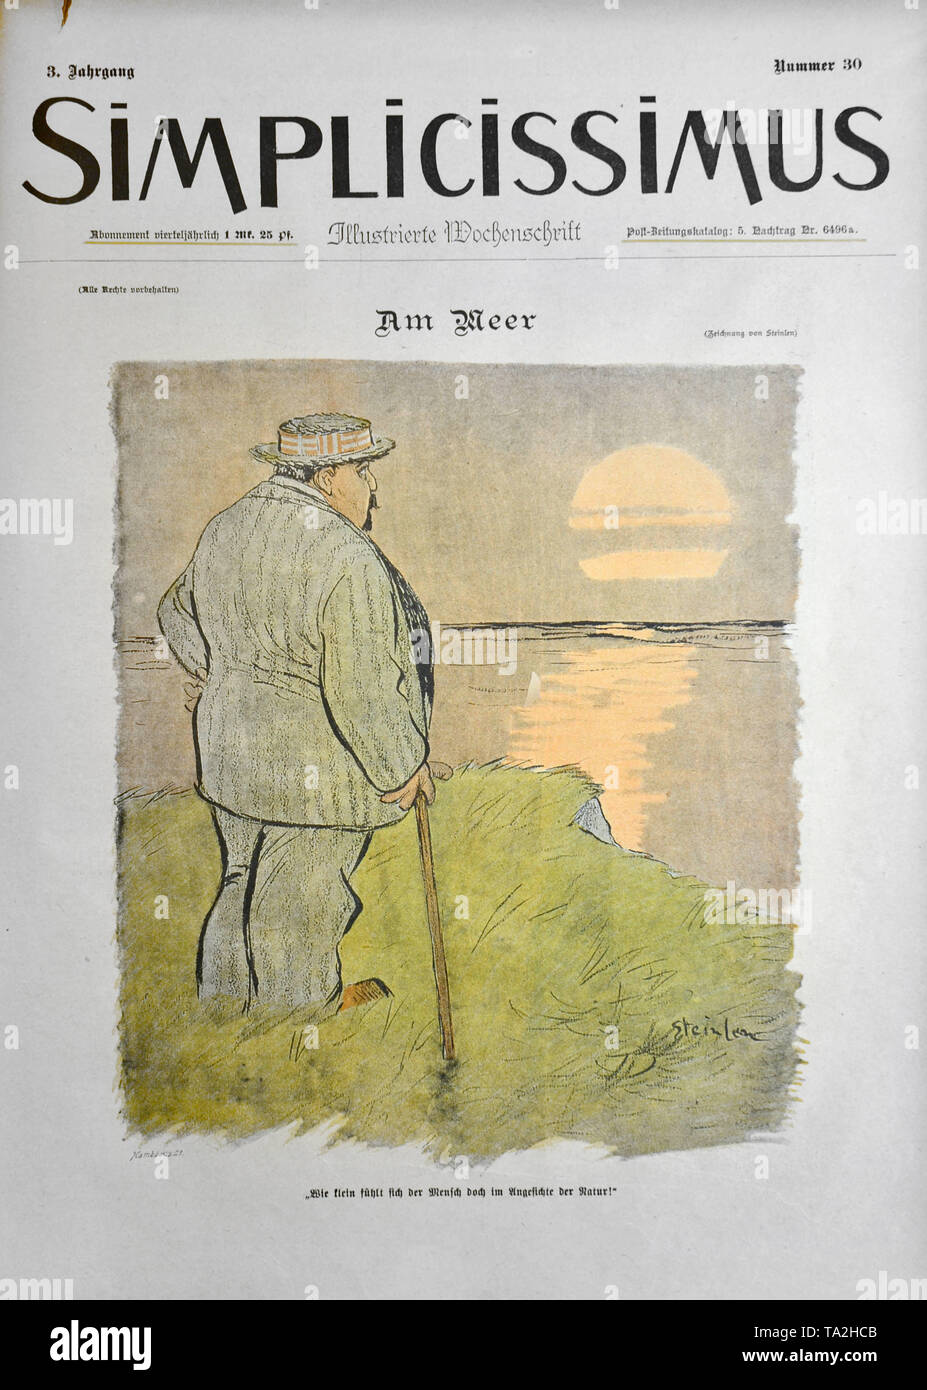 Gemme strå surfing The drawing "Am Meer" (By the Sea) by Theophile-Alexandre Steinlen.  Caricature from the satirical magazine "Simplicissimus", Volume 3, vol. 30,  p. 233. A man stands on the coast and looks at the